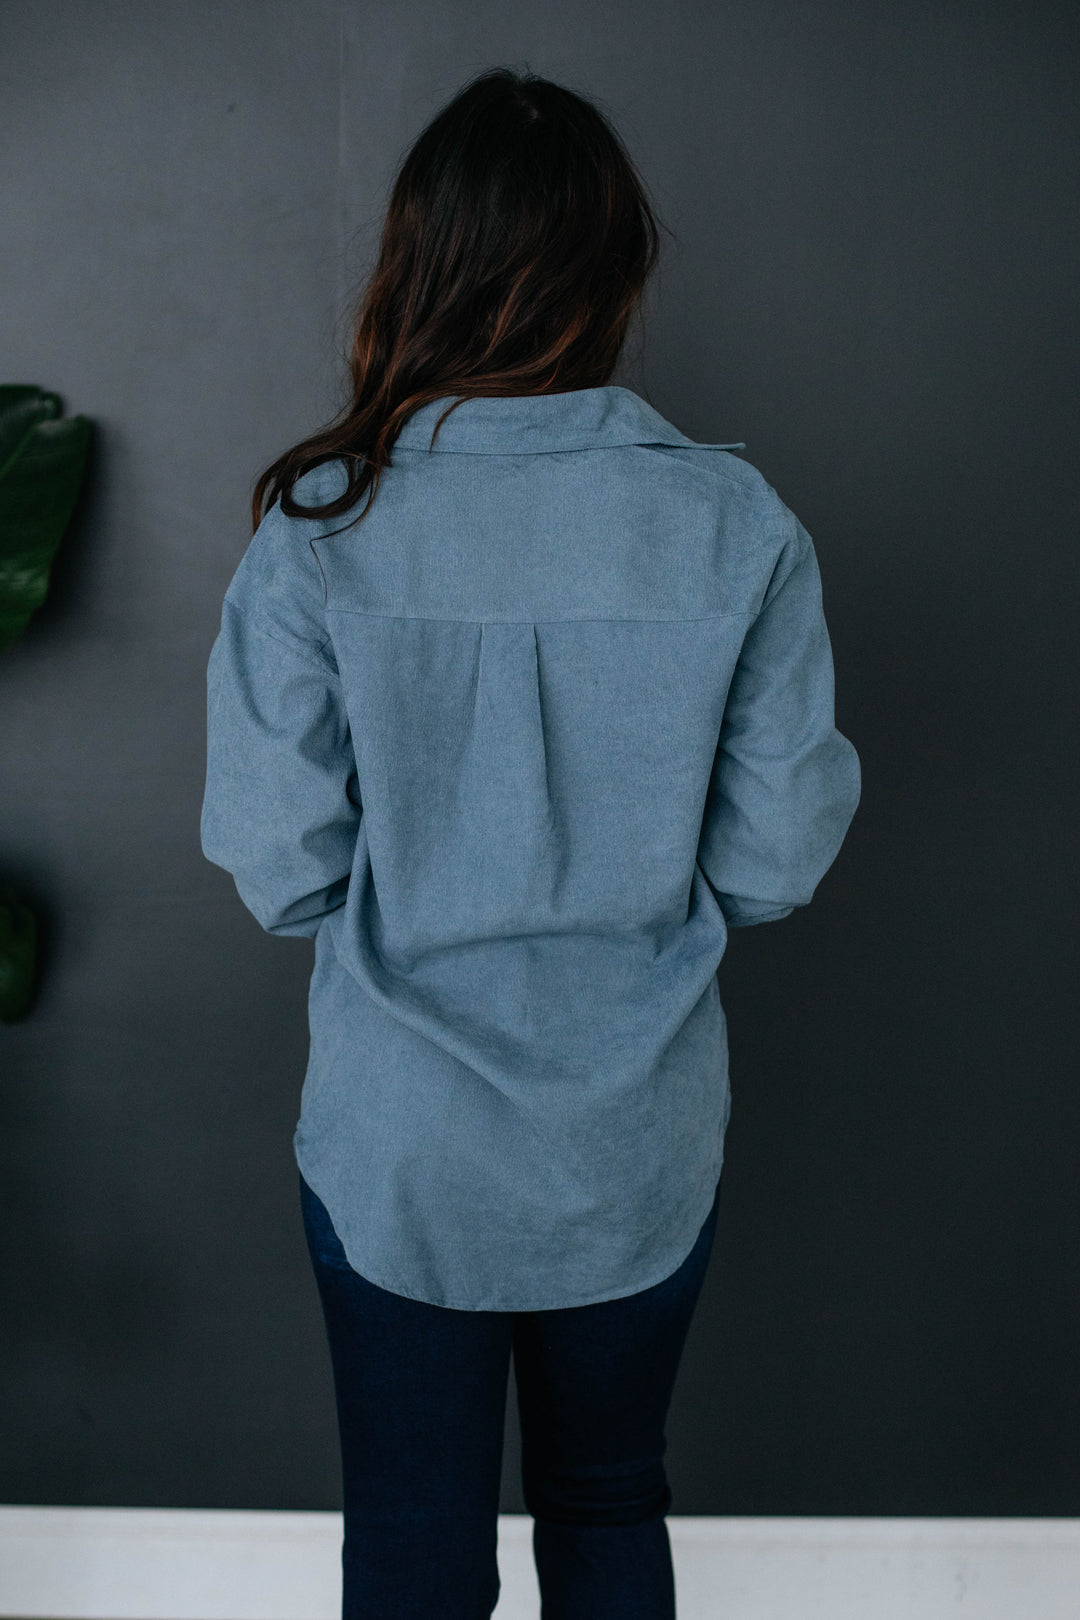 Driscoll Corduroy Top - Dusty Blue